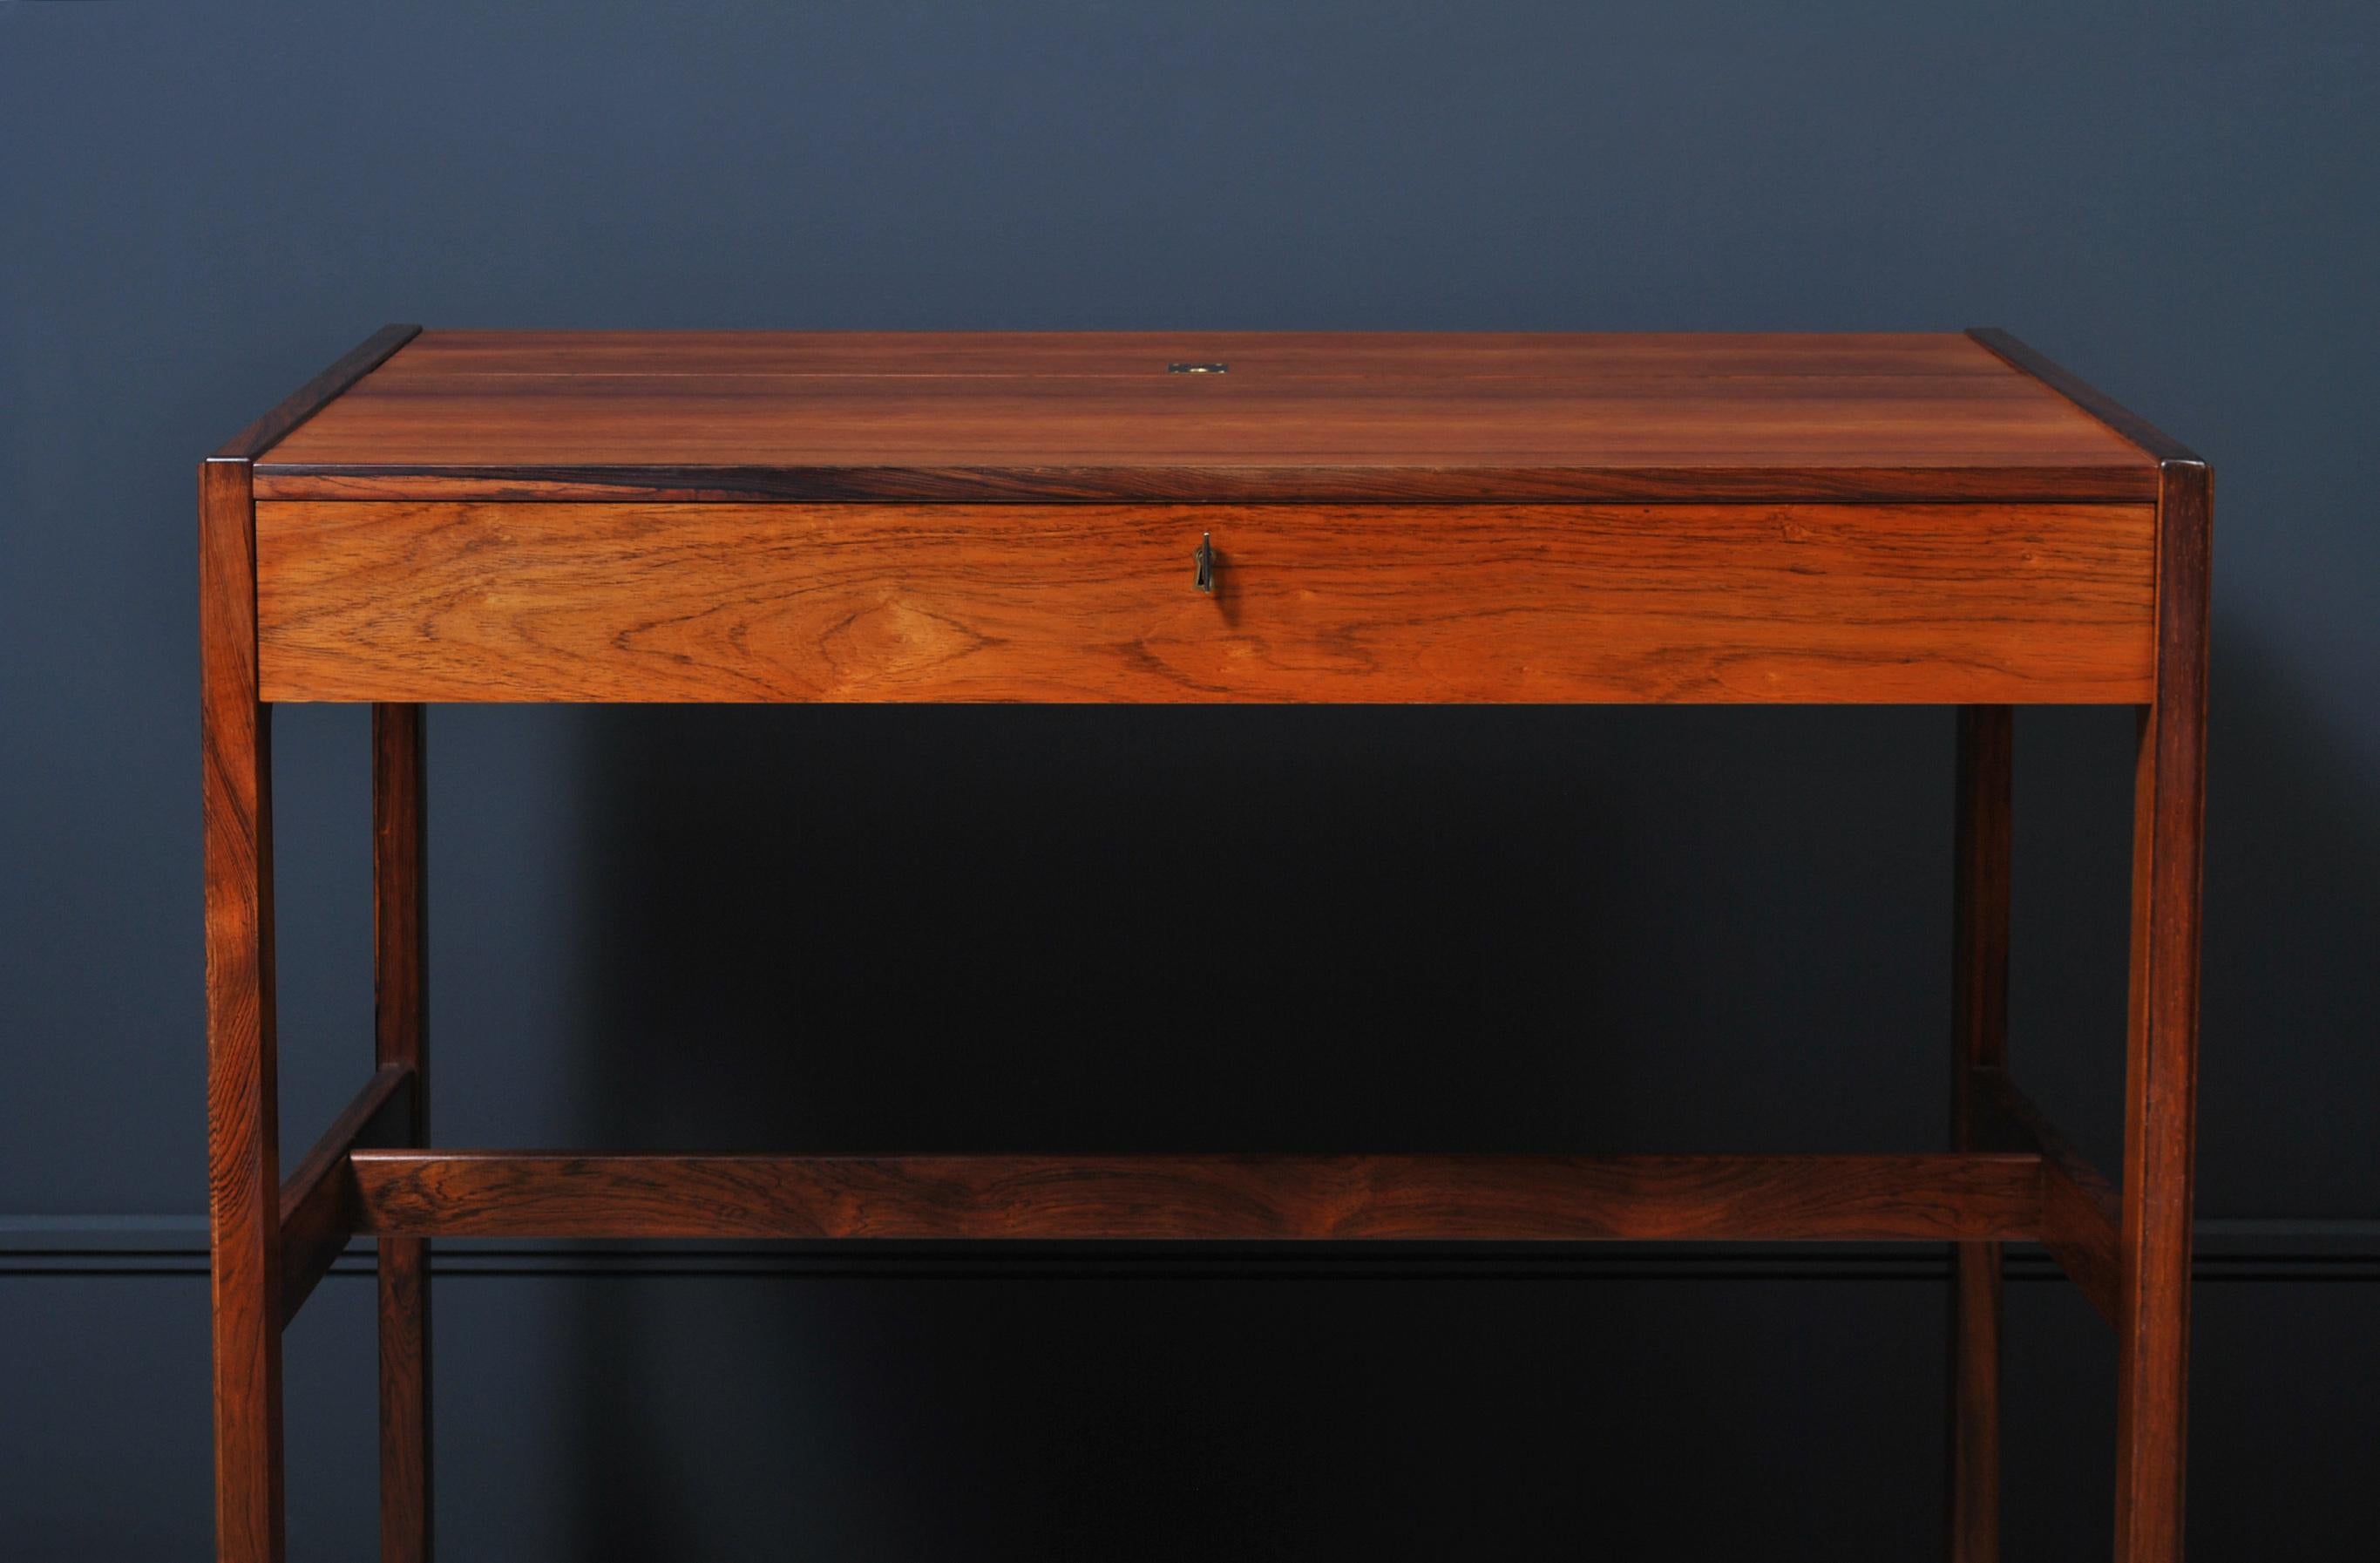 Superb Danish rosewood modernist desk by Arne Wahl Iversen for Vinde Mobelfabrik, Denmark, circa 1960. Very rare model 82.
Lovely rosewood construction with a flip top hatch revealing a multi compartment interior and mirror. Lockable front drawer